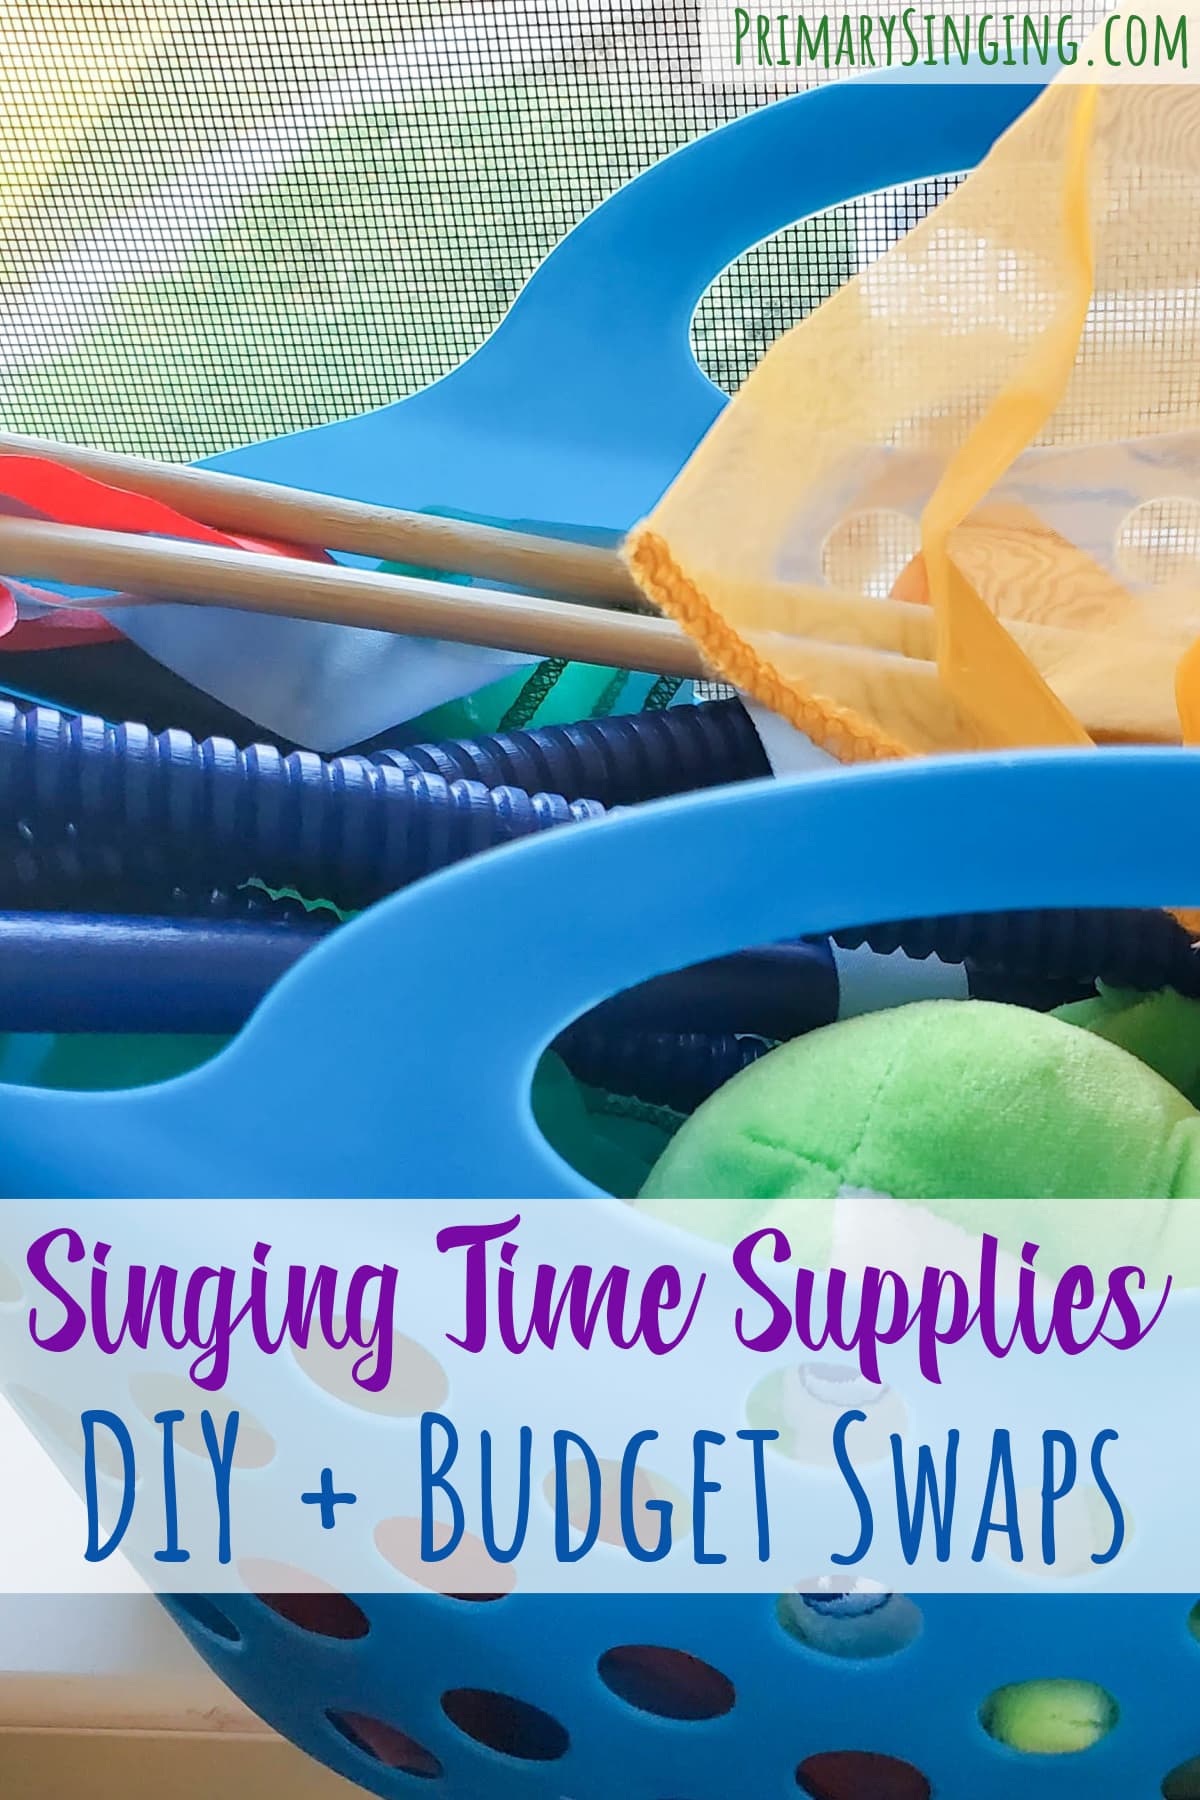 Singing Time Supplies budget swaps & alternatives plus how to make your own instruments and manipulatives DIY tutorials! Lots of ideas and tips for LDS Primary music leaders and teachers.